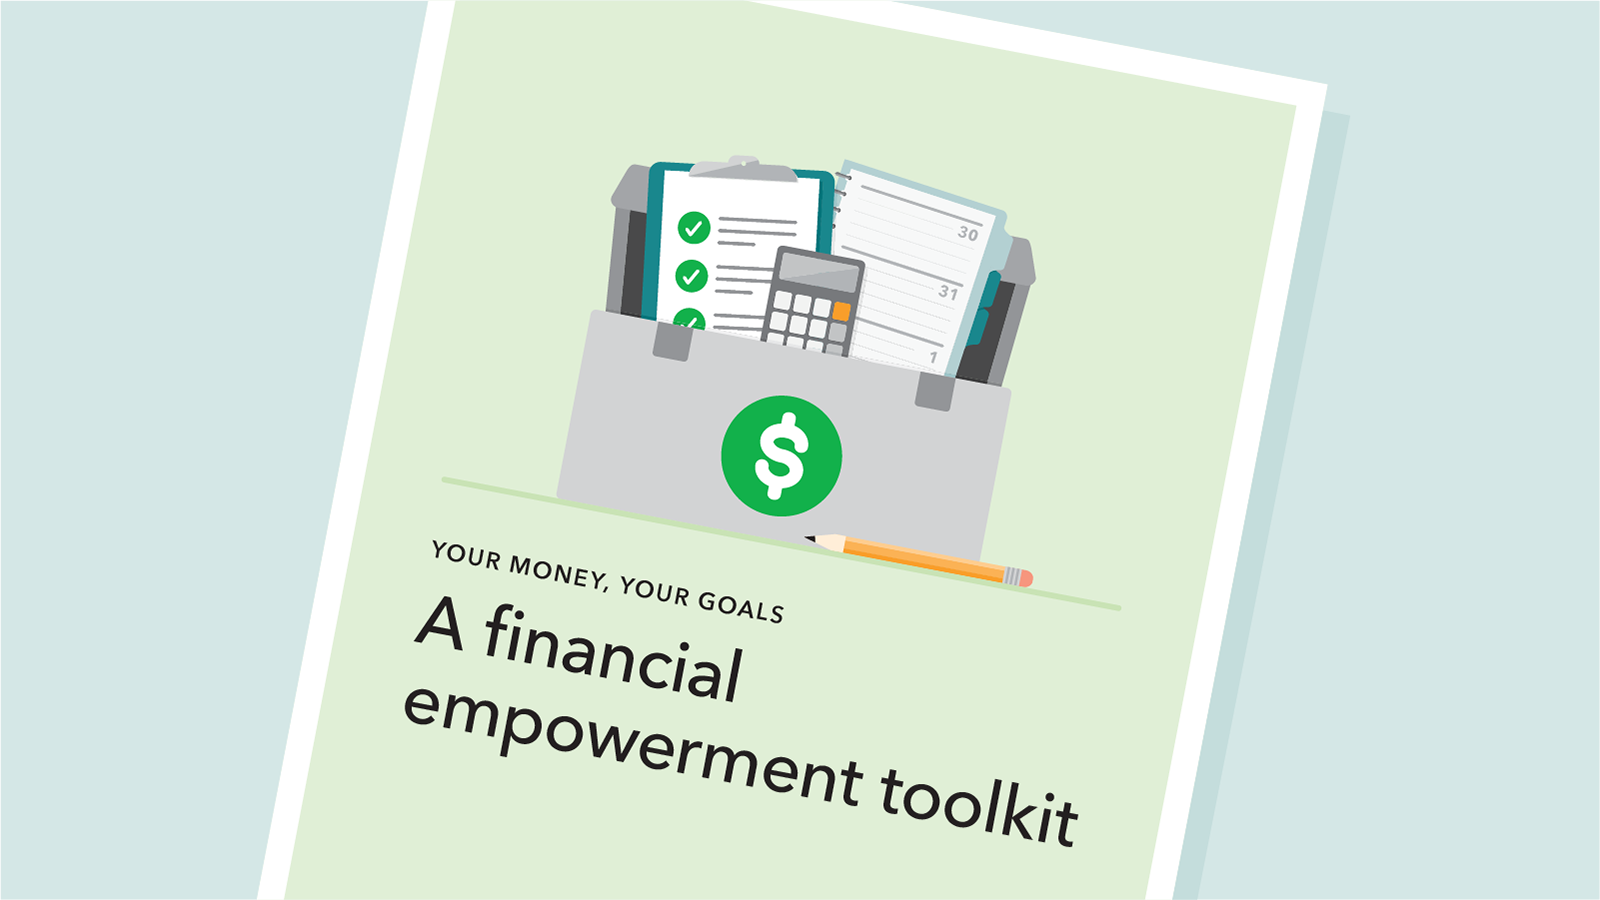 Your Money, Your Goals: A Financial Empowerment Toolkit